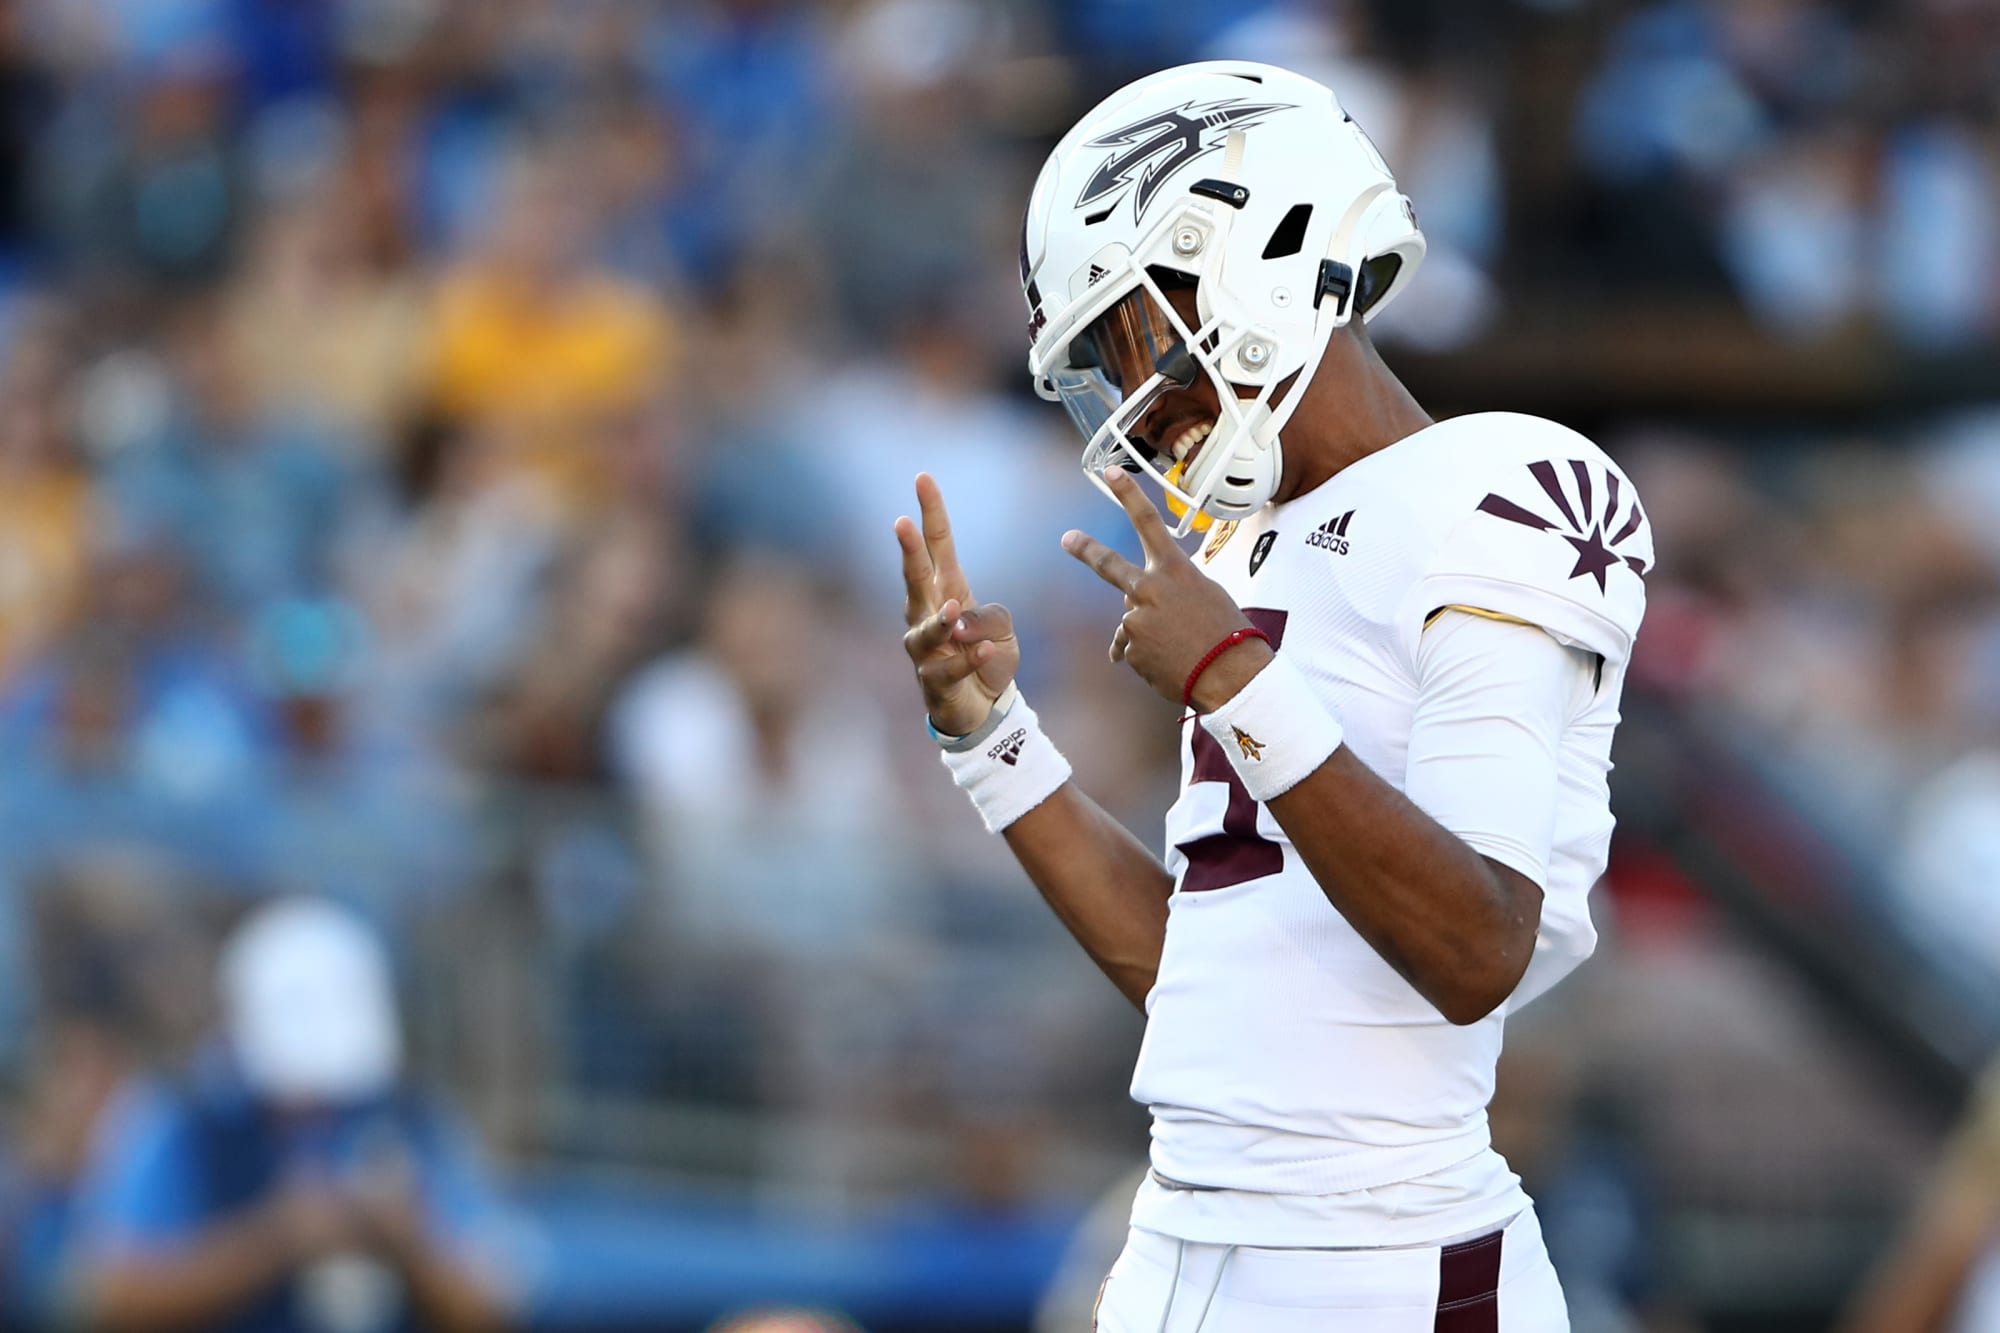 Is it too early to look ahead to 2022 NFL Draft quarterbacks? - Page 2